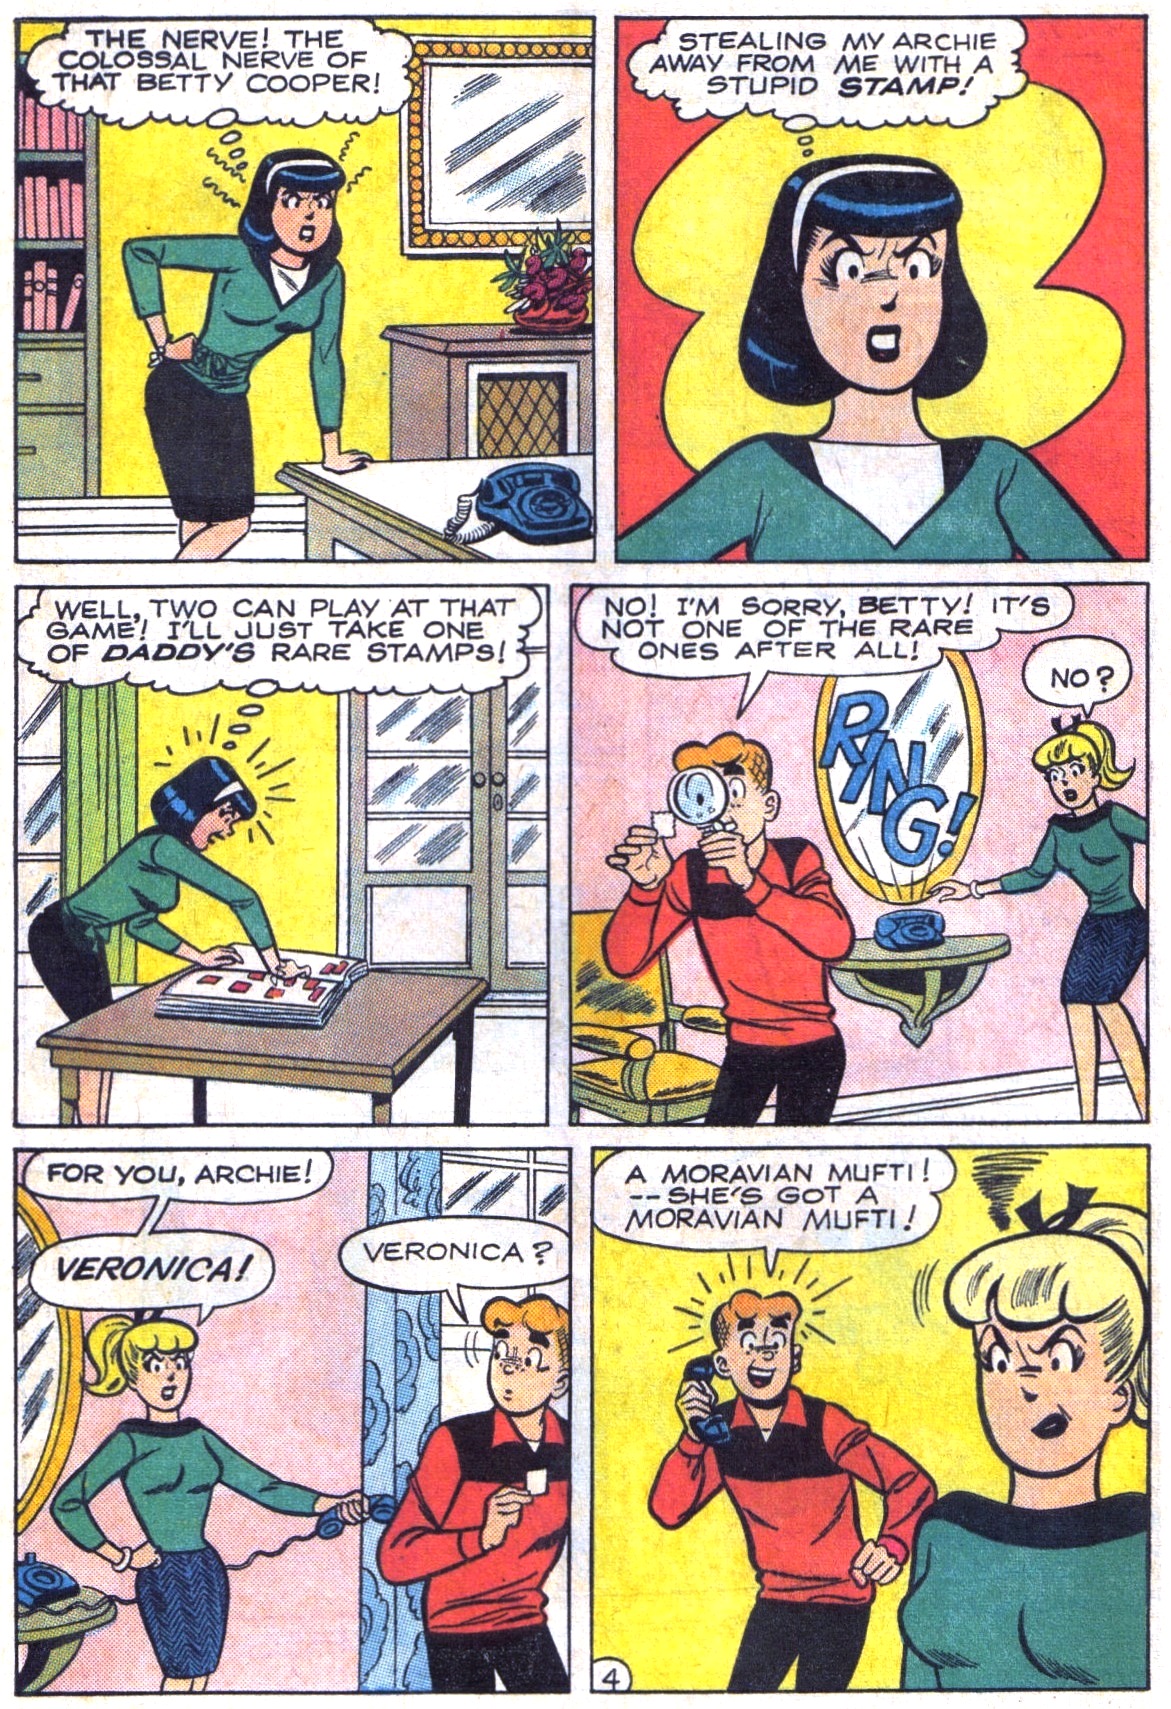 Archie (1960) 162 Page 32